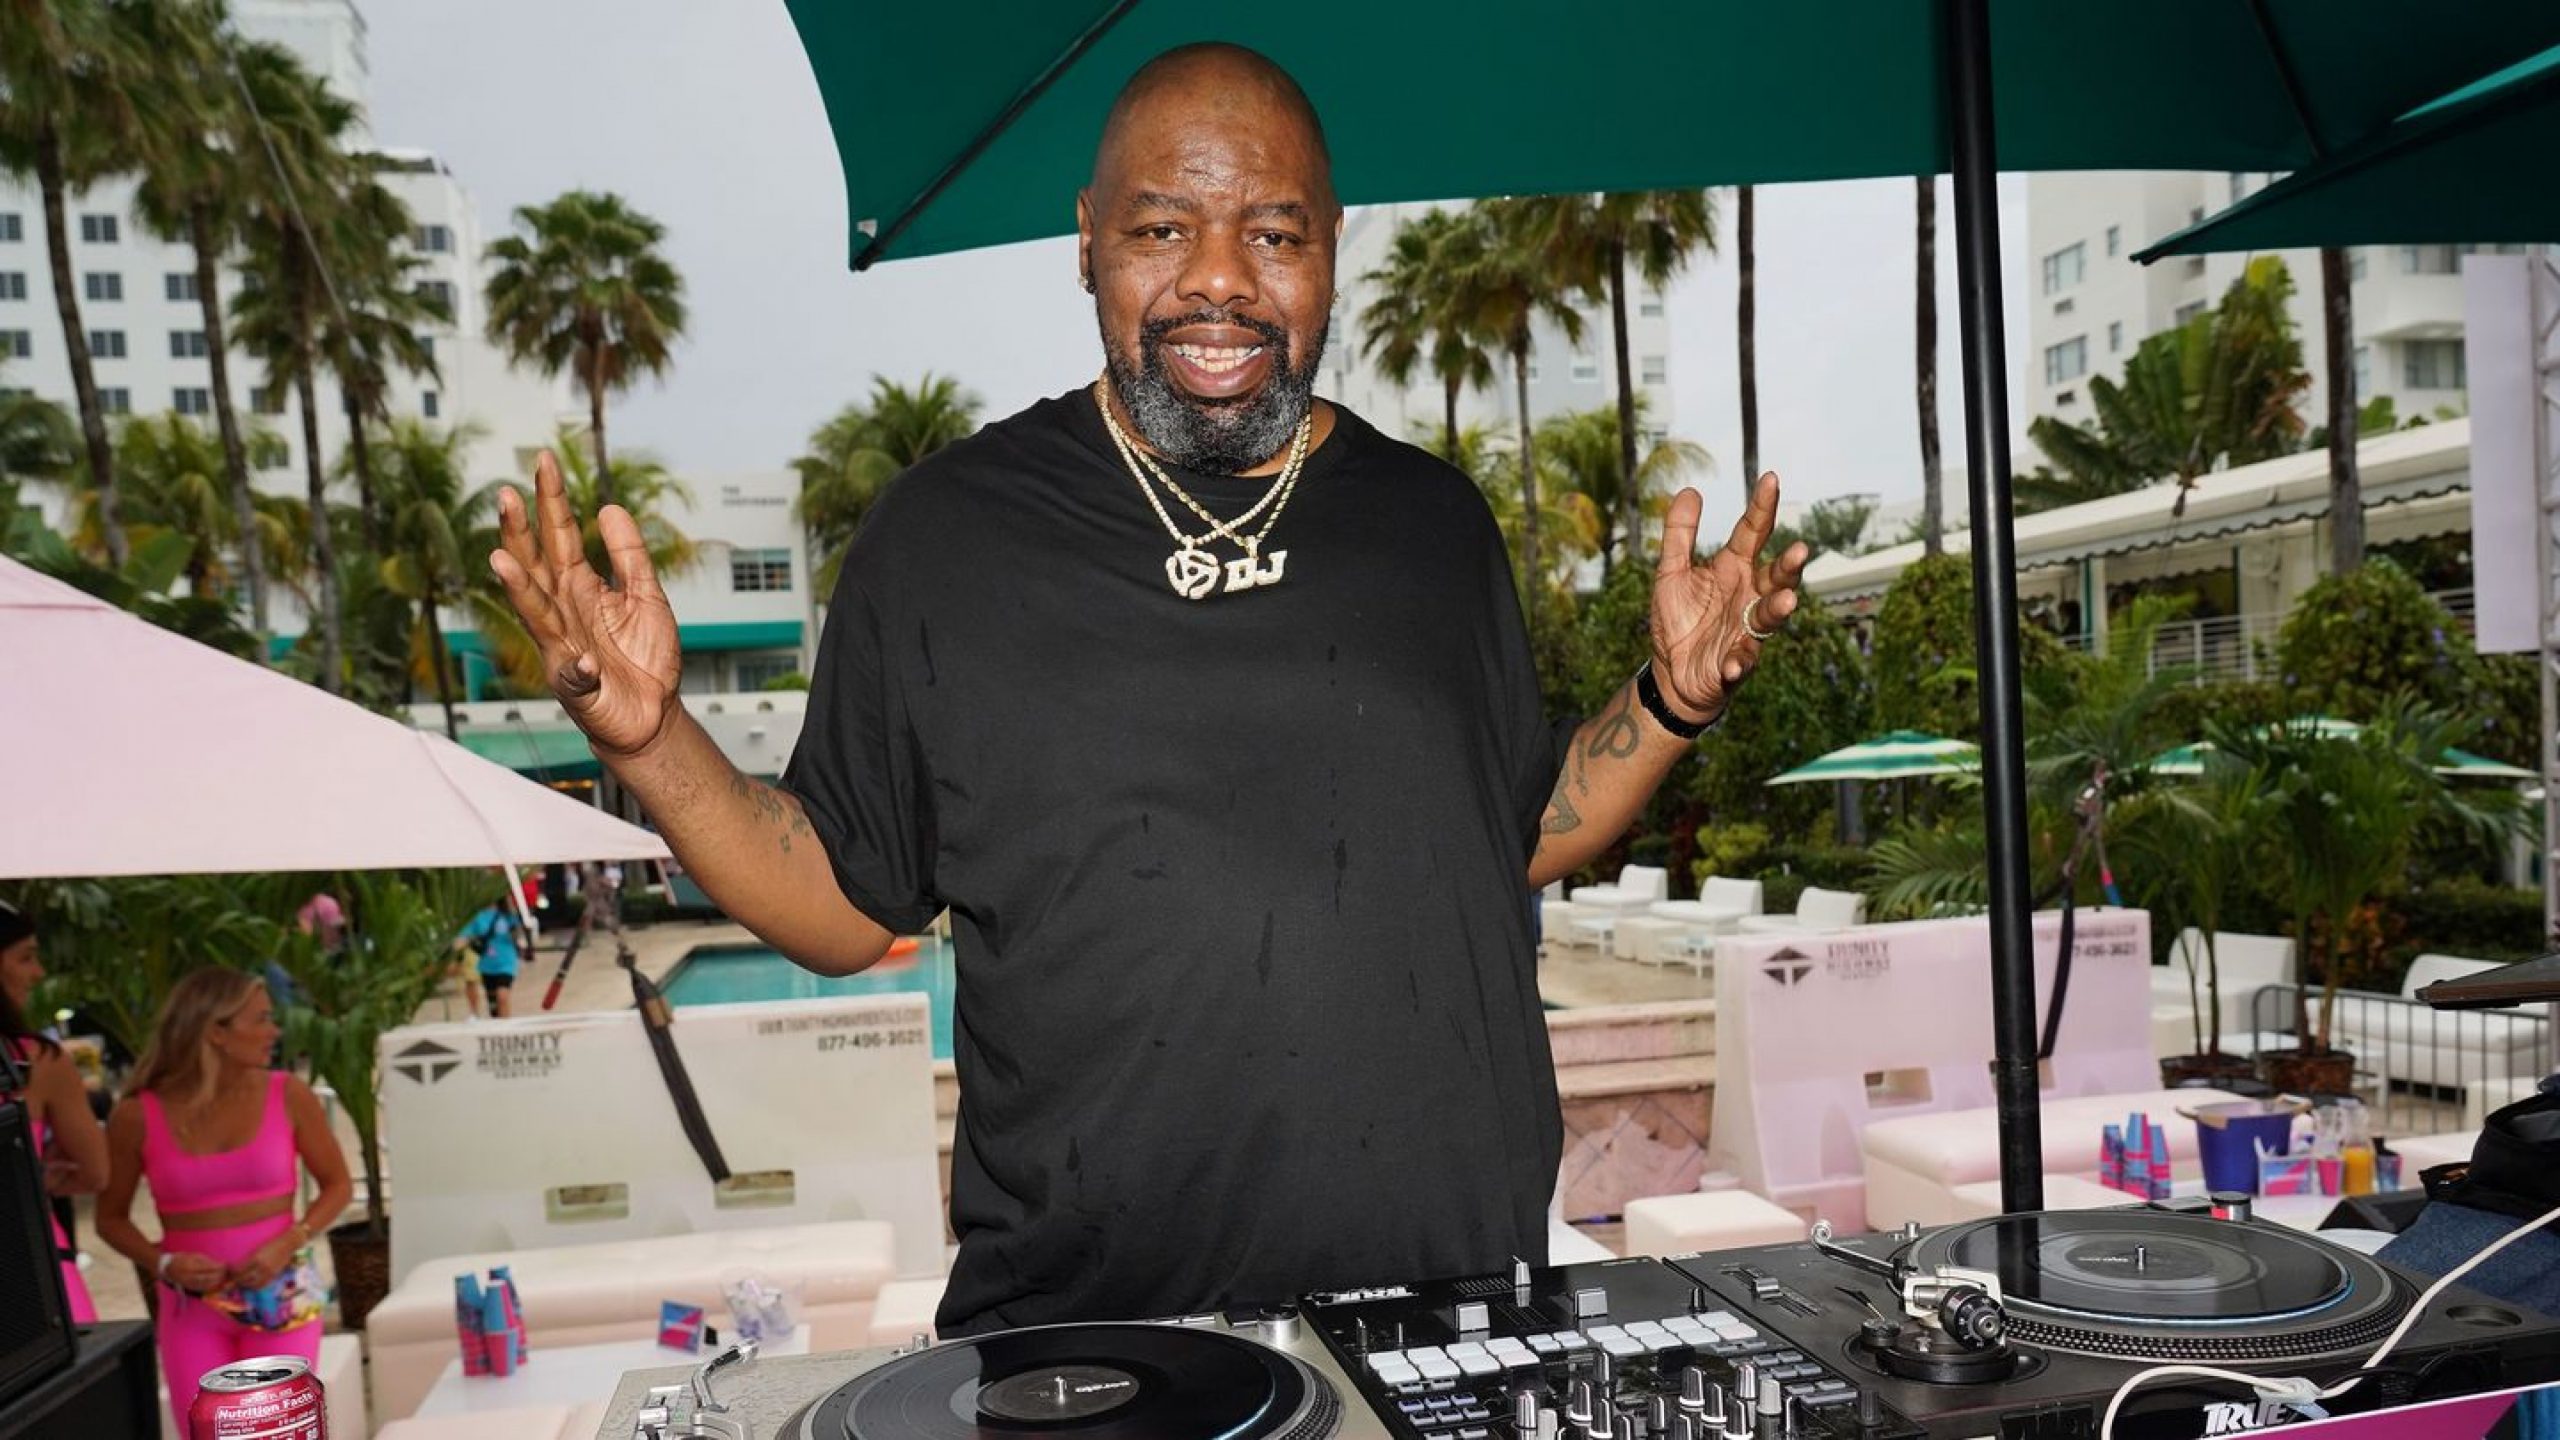 Biz Markie, ‘Just A Friend’ Rapper And Hip-Hop Icon, Dead At 57